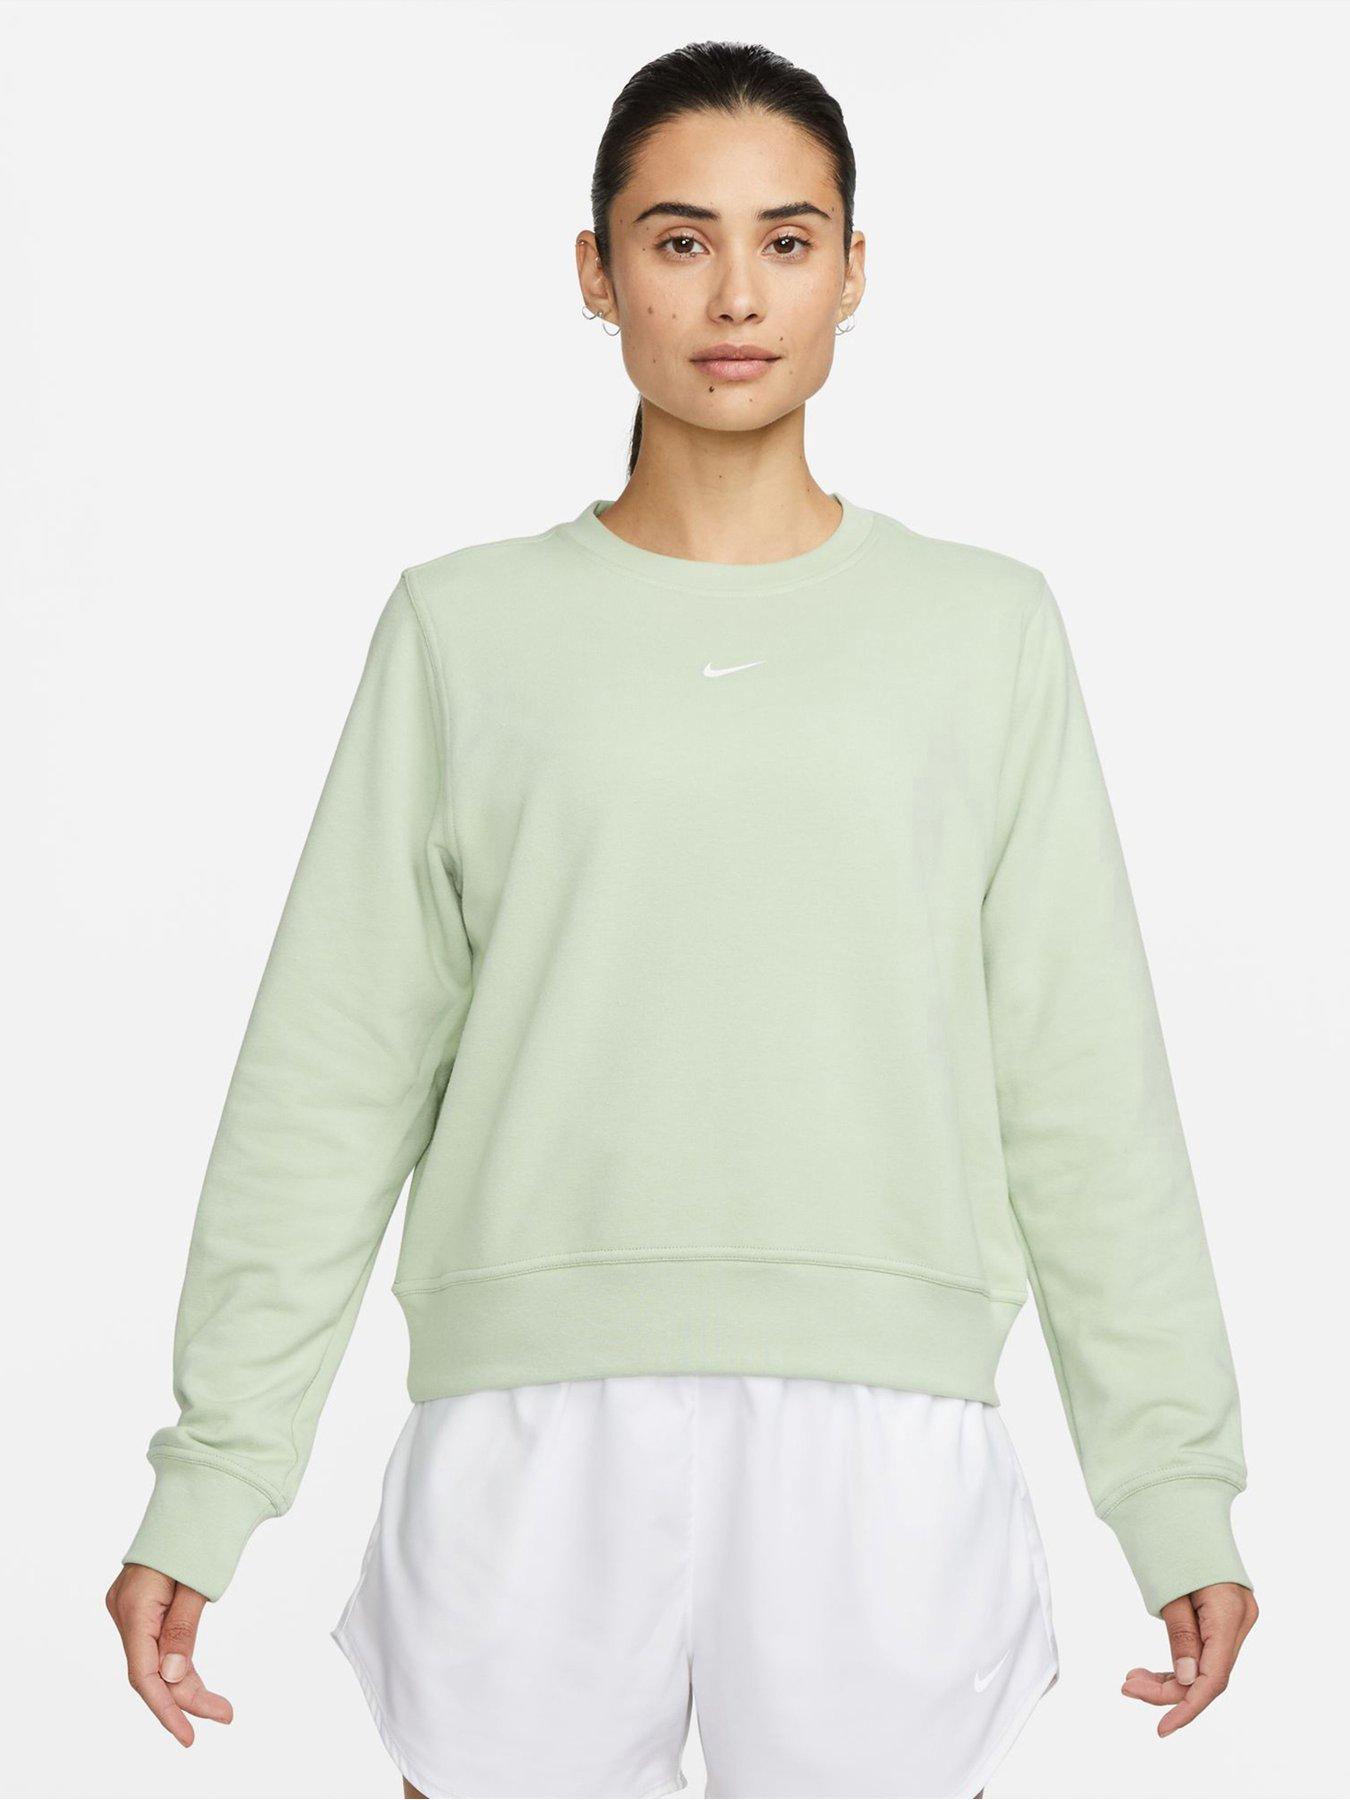 Women's Nike Plus Dri-FIT One High- Waisted 7/8 French Terry